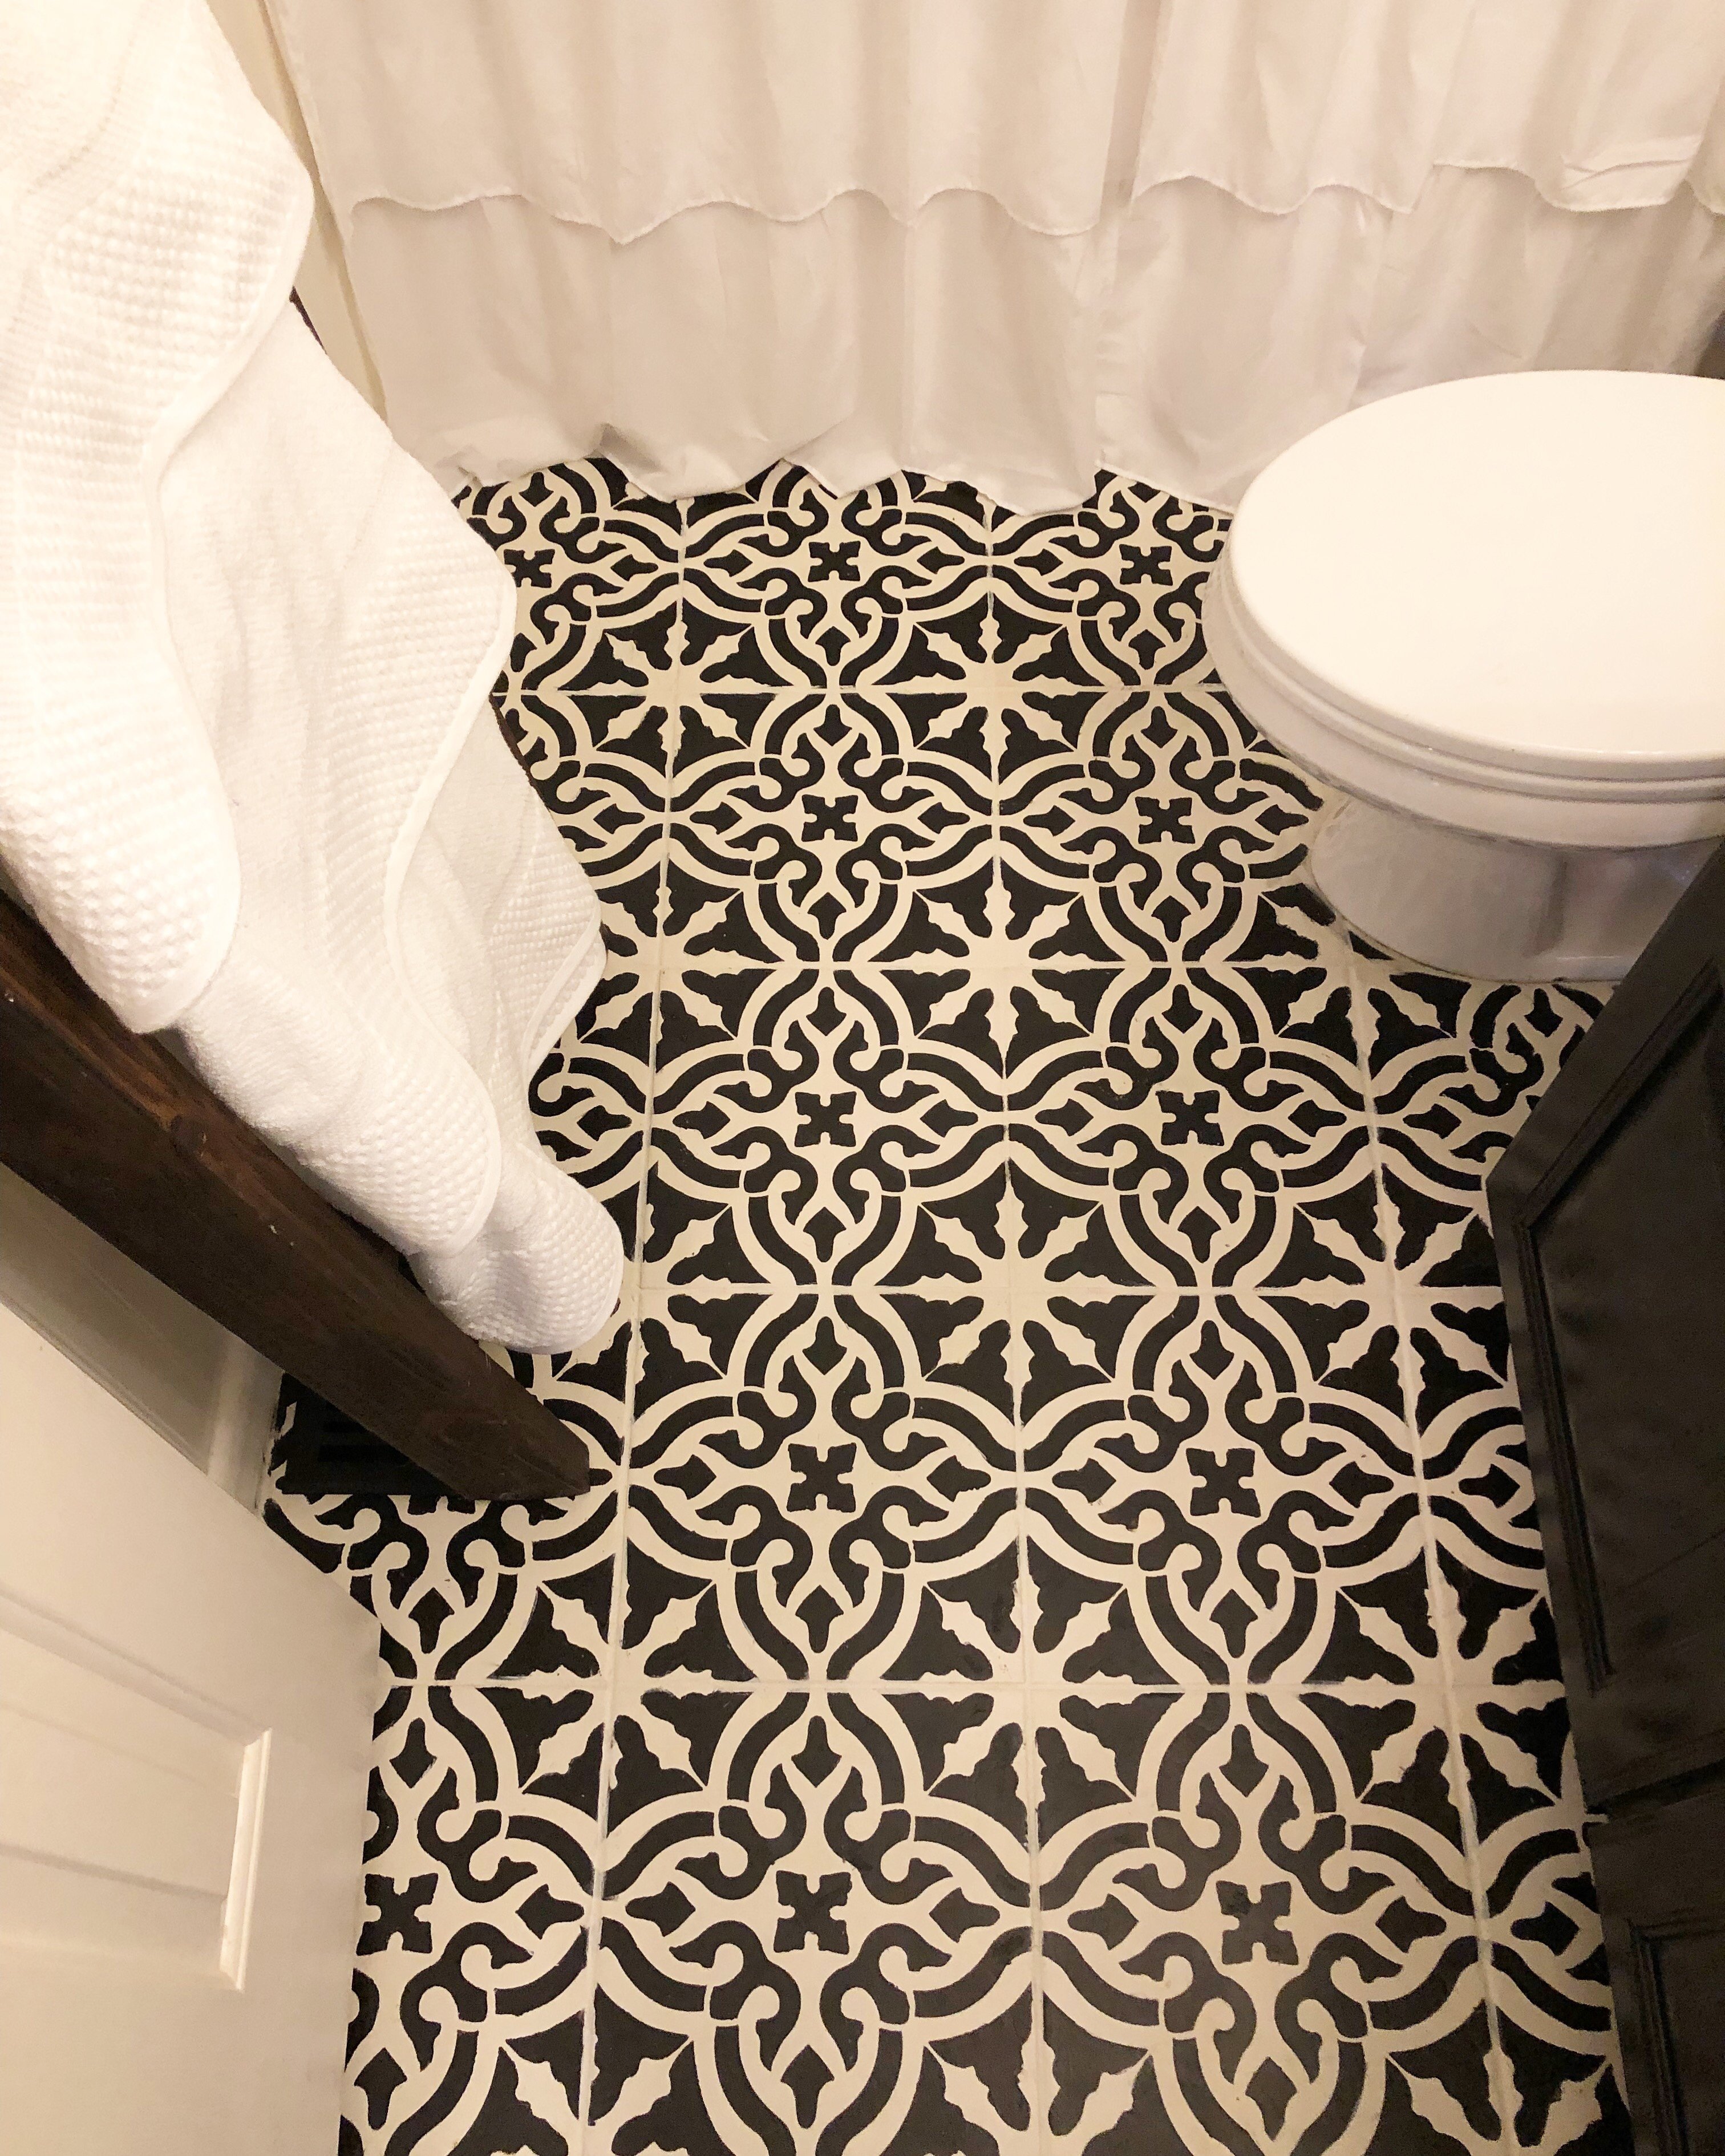 How to Stencil Your Bathroom Floor with Chalk Paint